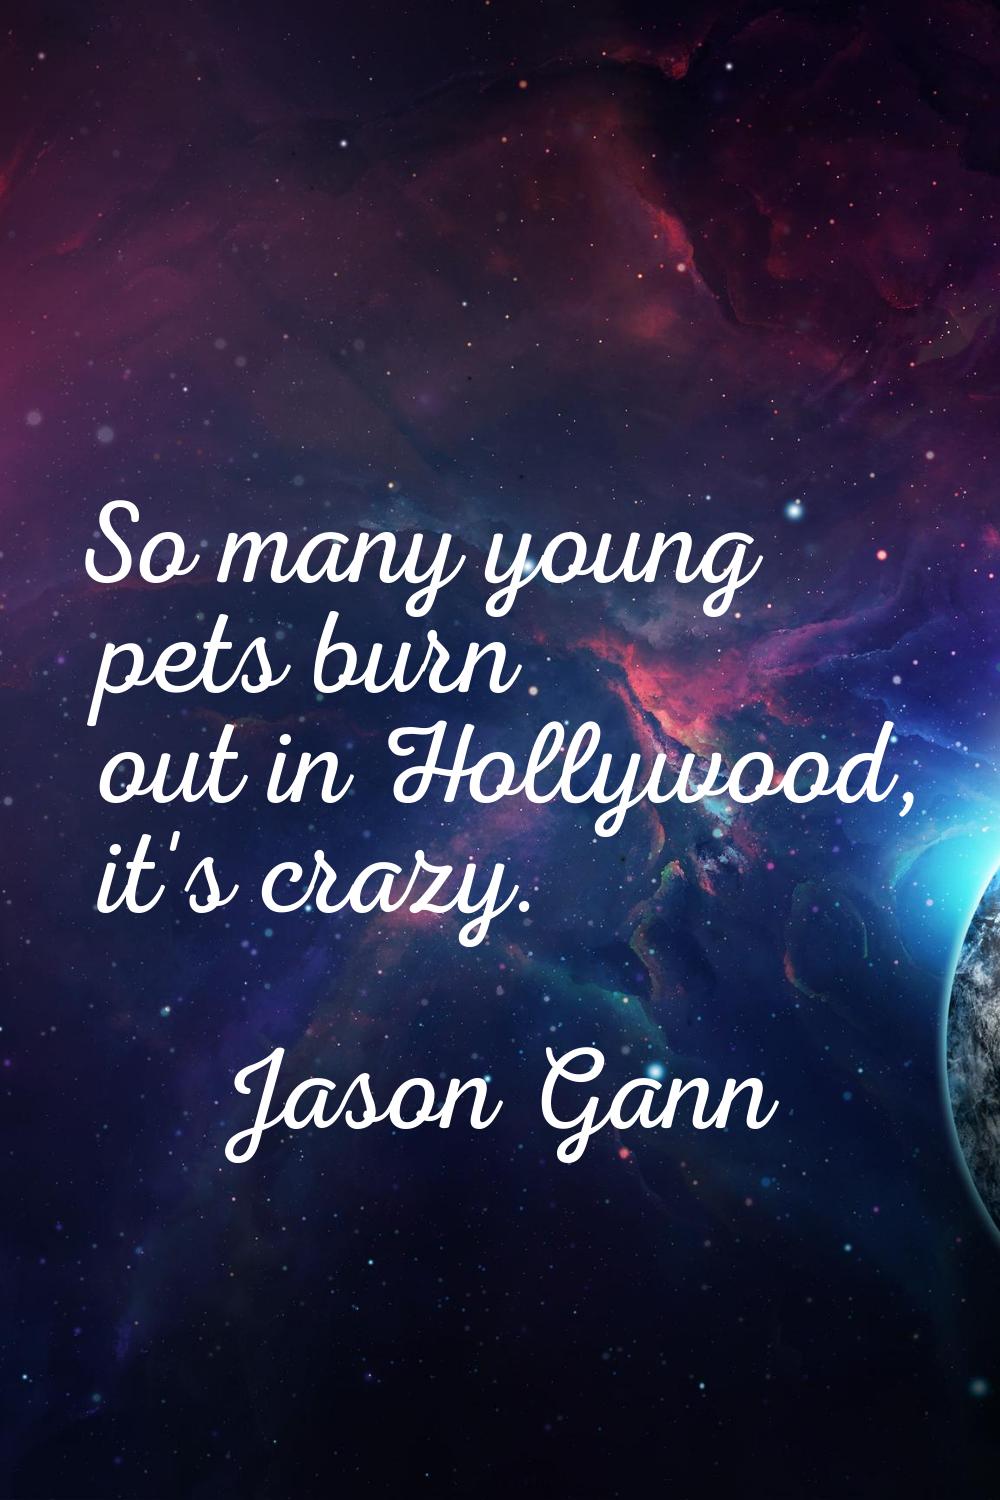 So many young pets burn out in Hollywood, it's crazy.